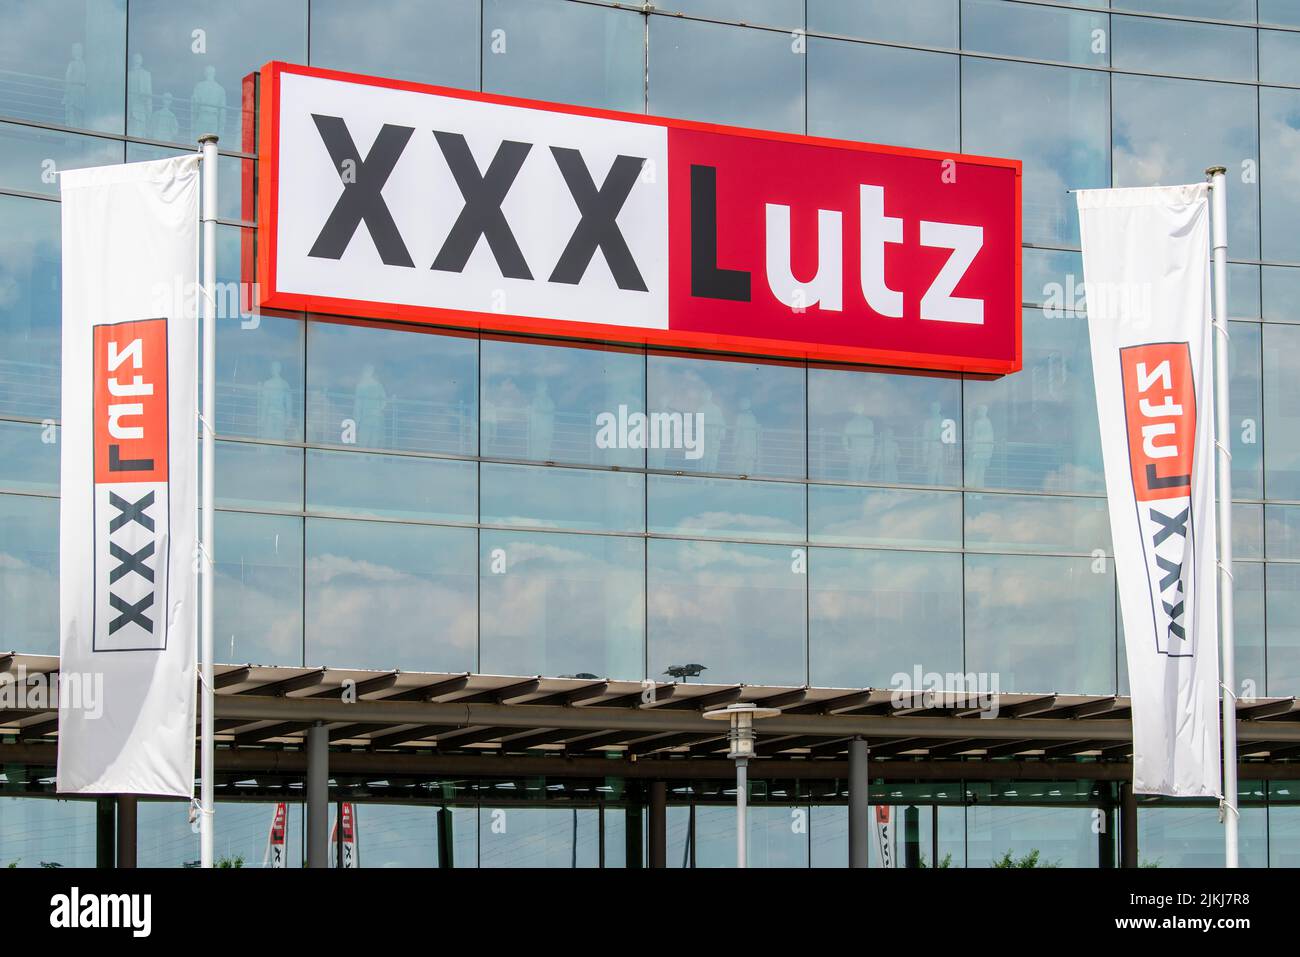 Advertising and company sign of the company XXX Lutz in Haunstetten Stock Photo